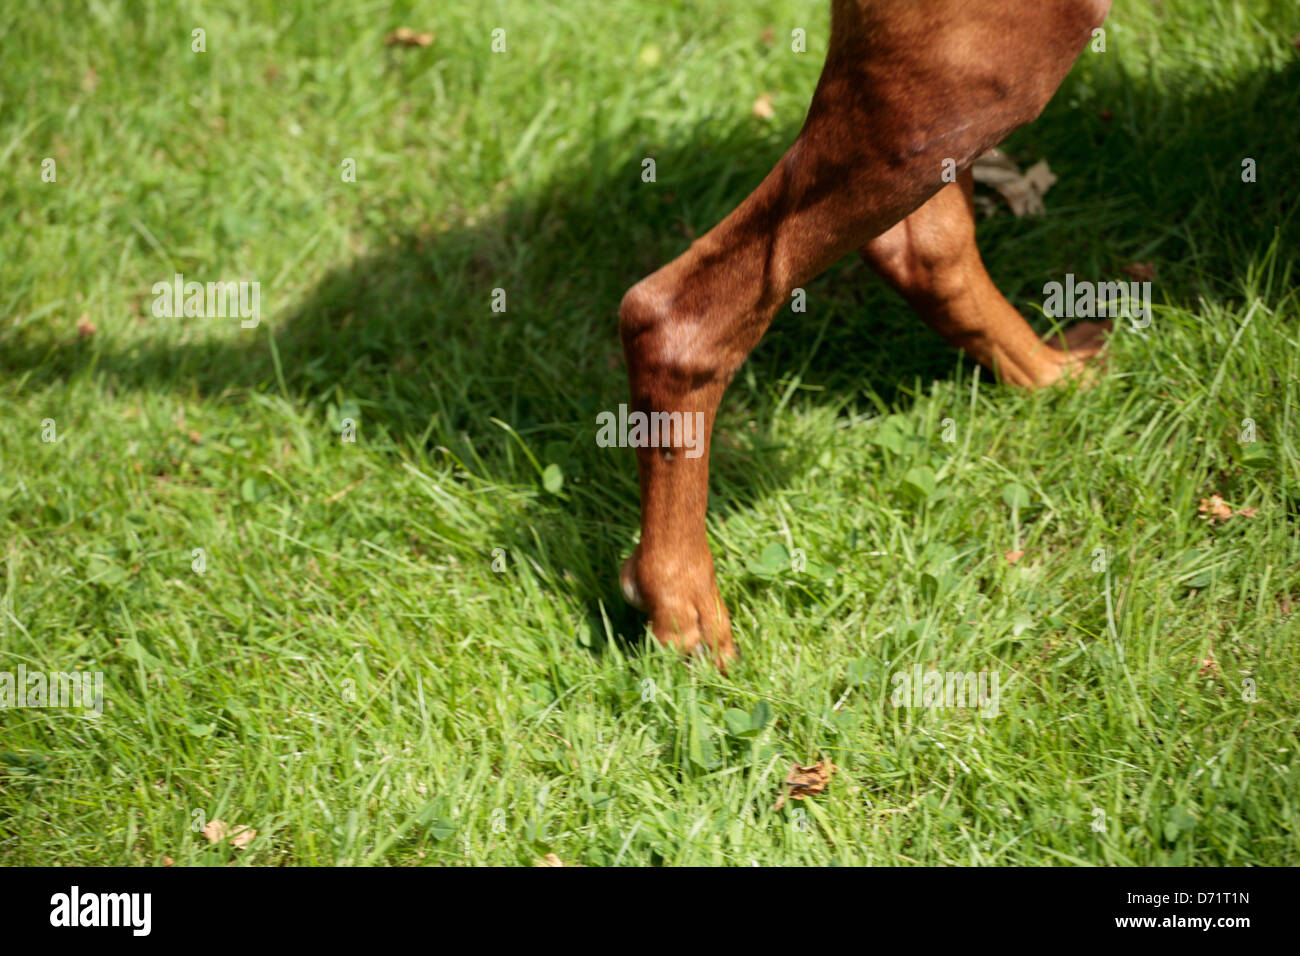 Quirky composition of dogs back legs on grass Stock Photo